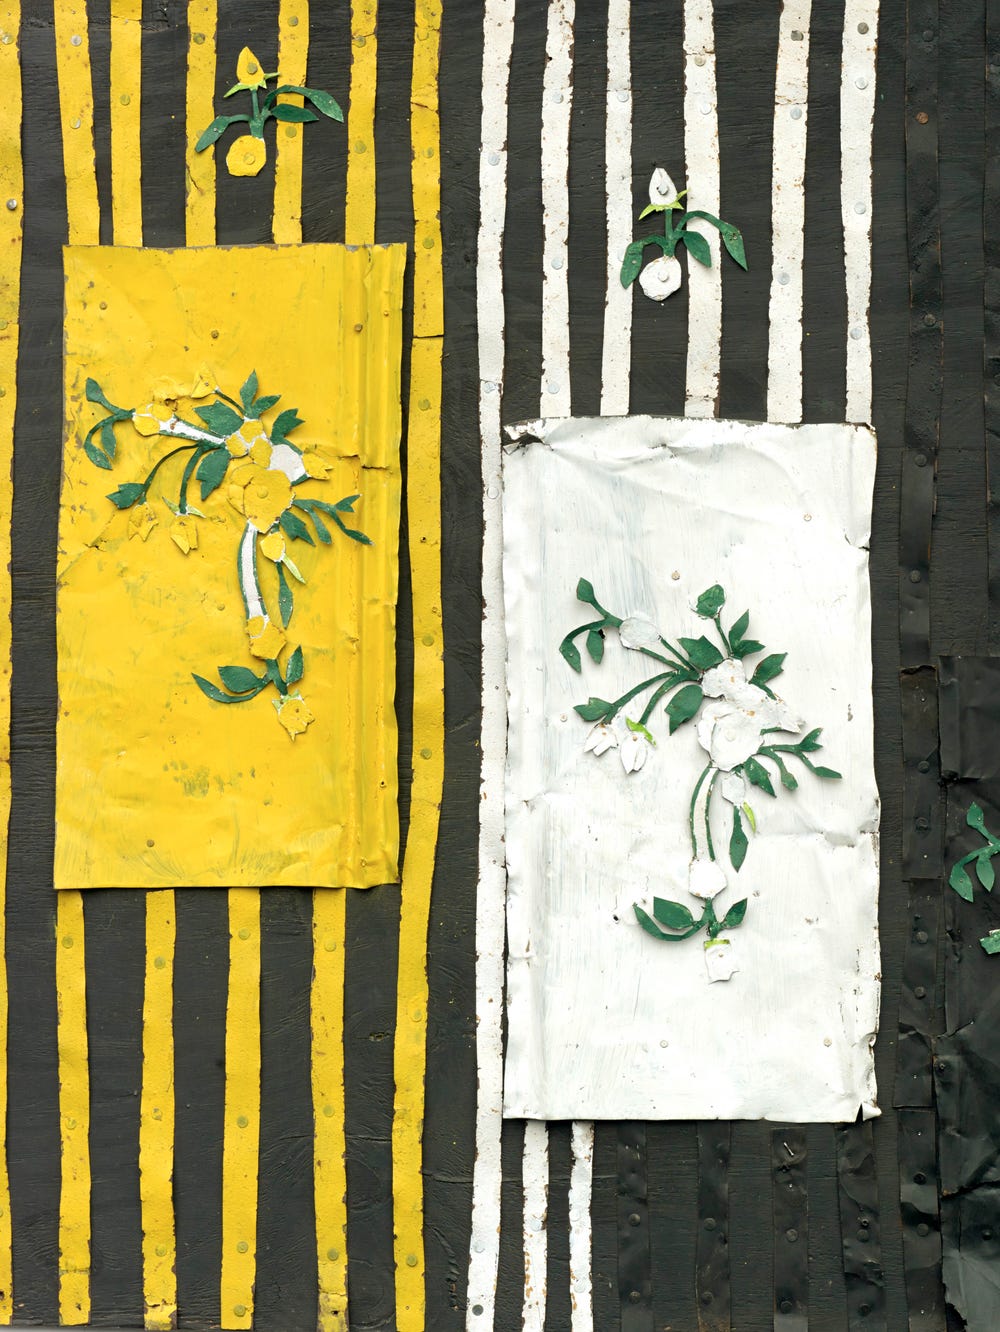 assemblage with stripes and flowers